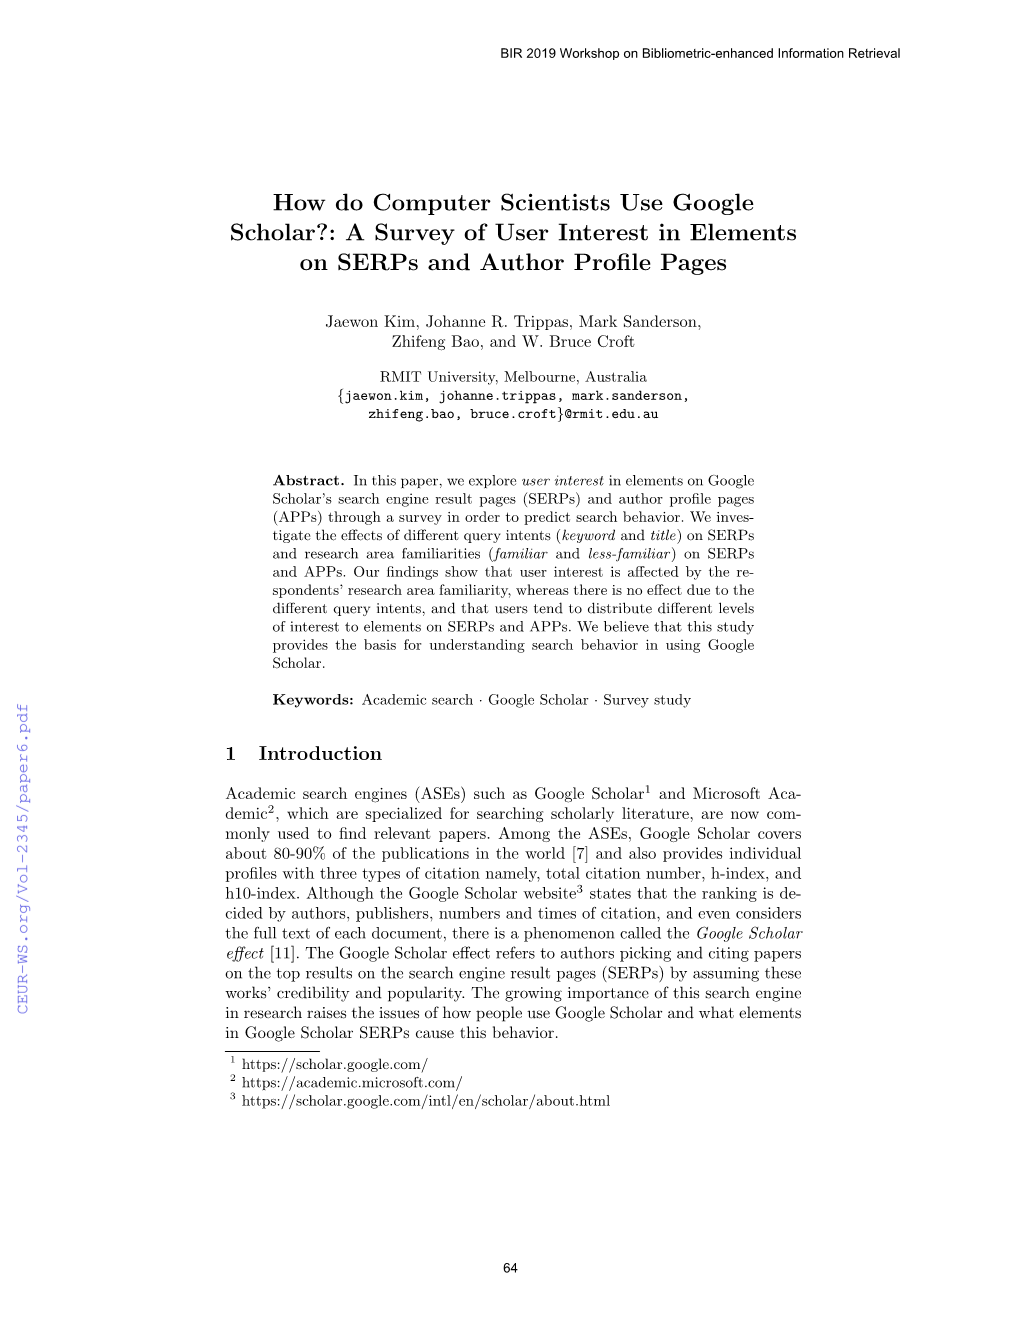 How Do Computer Scientists Use Google Scholar?: a Survey of User Interest in Elements on Serps and Author Proﬁle Pages